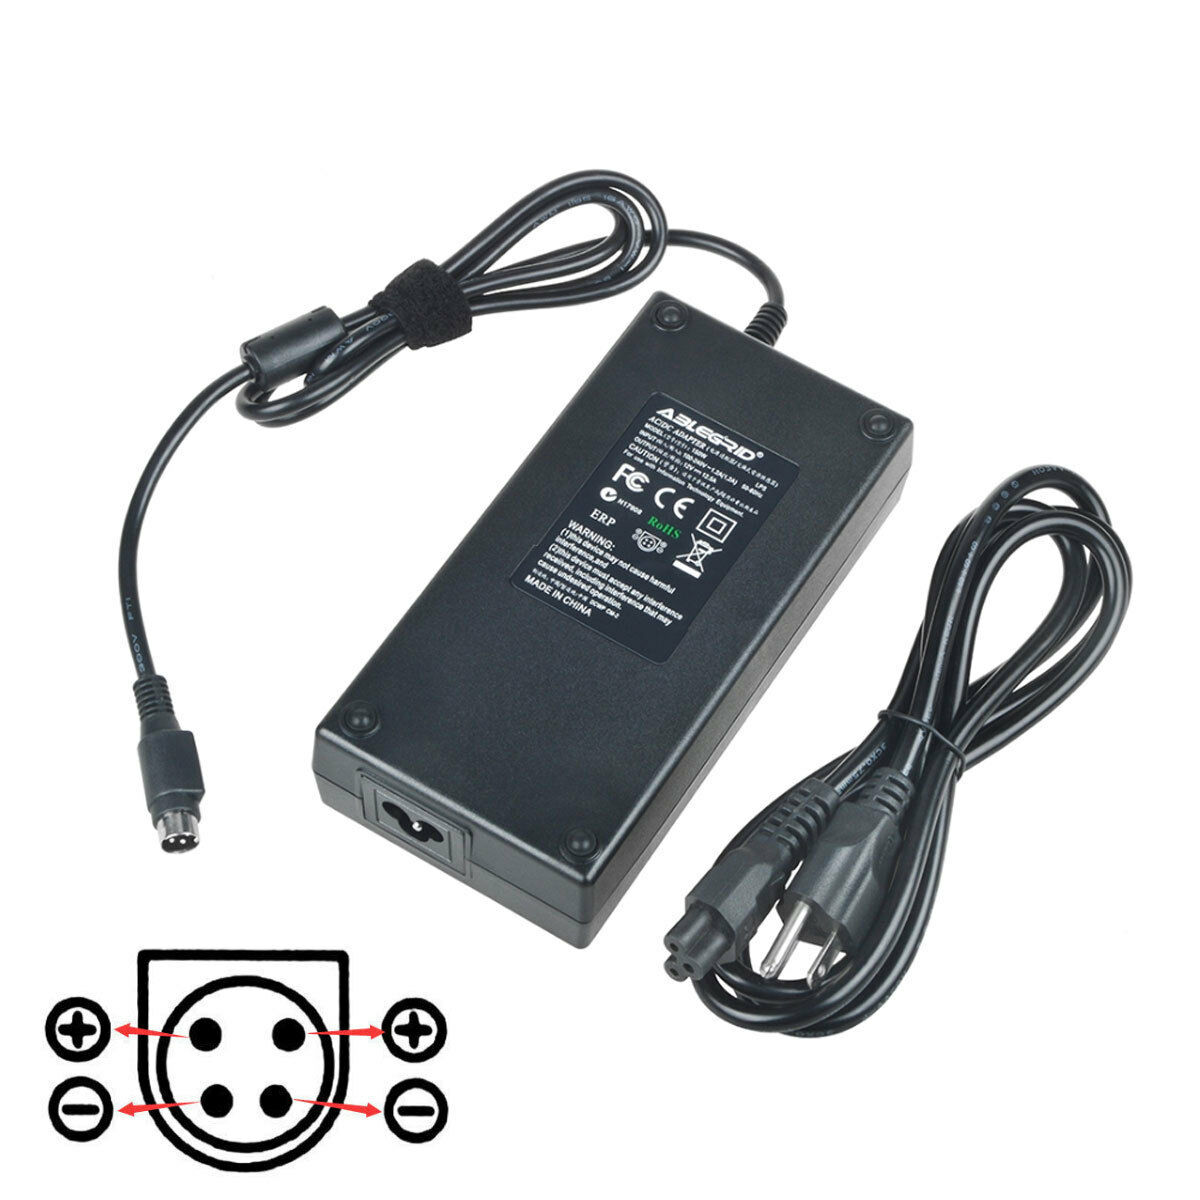 4-Pin AC Adapter Charger for Dell FSP150-AHAN1 LCD 9NA1350204 Power Cord Mains Construction: 100% B - Click Image to Close